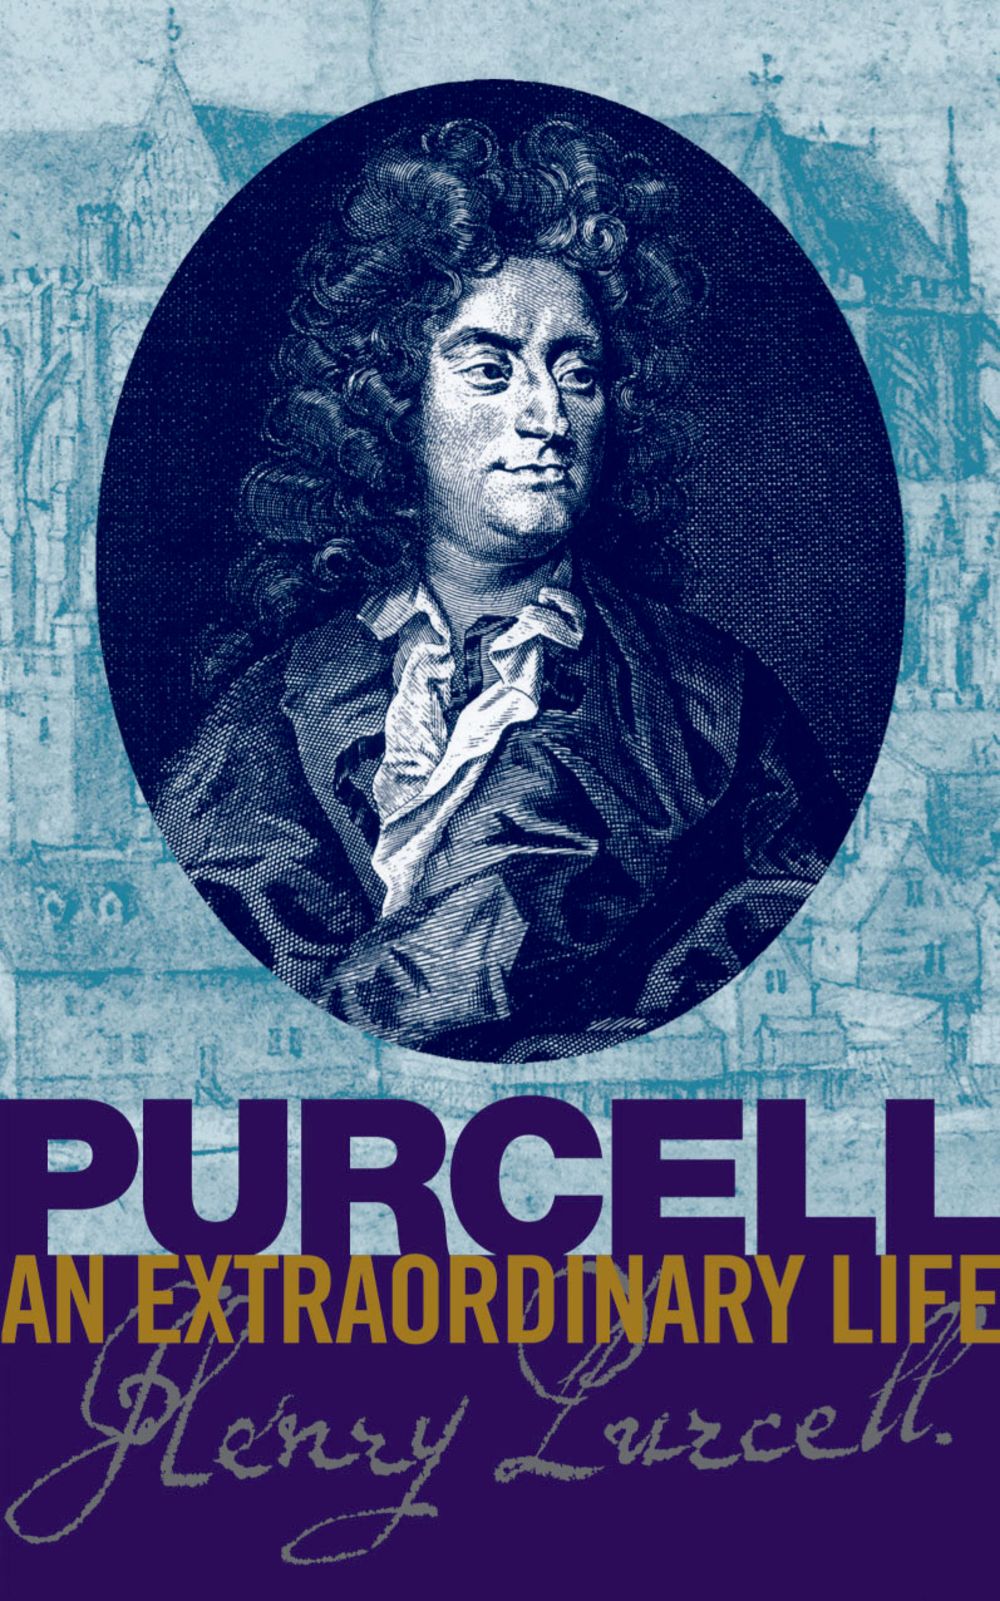 Bruce Wood: Purcell: an Extraordinary life: Biography